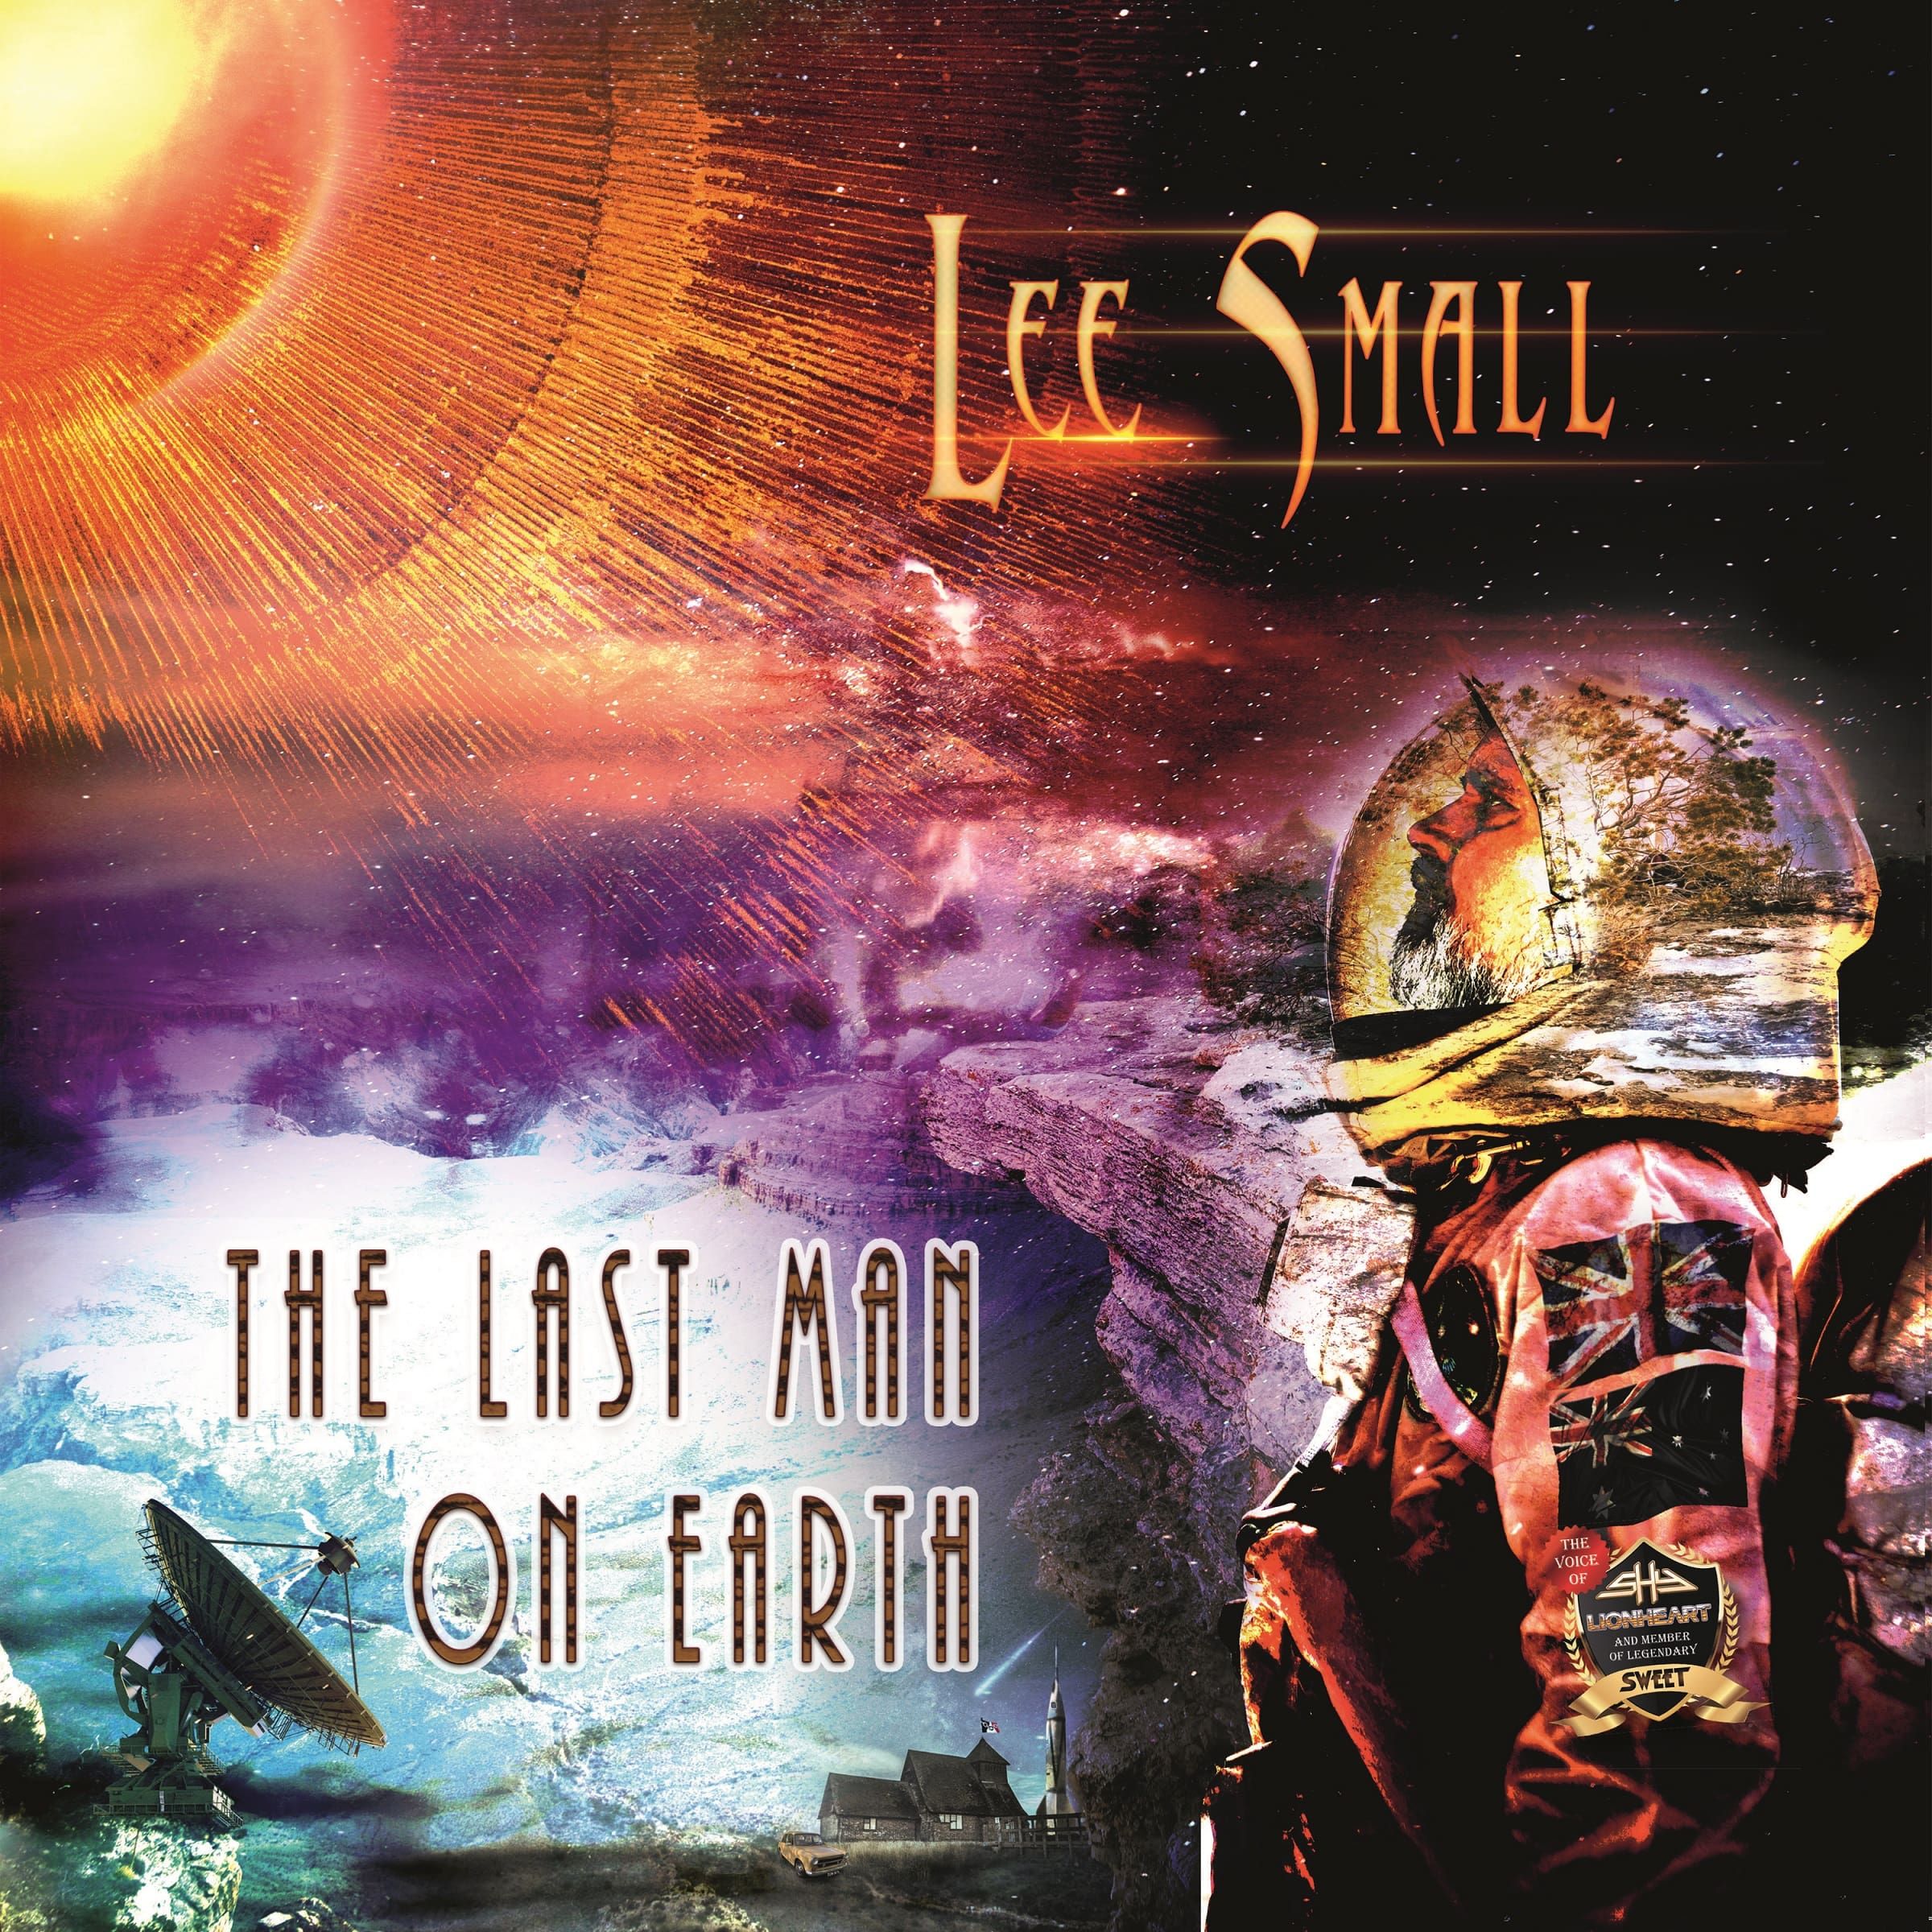 Lee Small kündigt Soloalbum "The Last Man On Earth" an